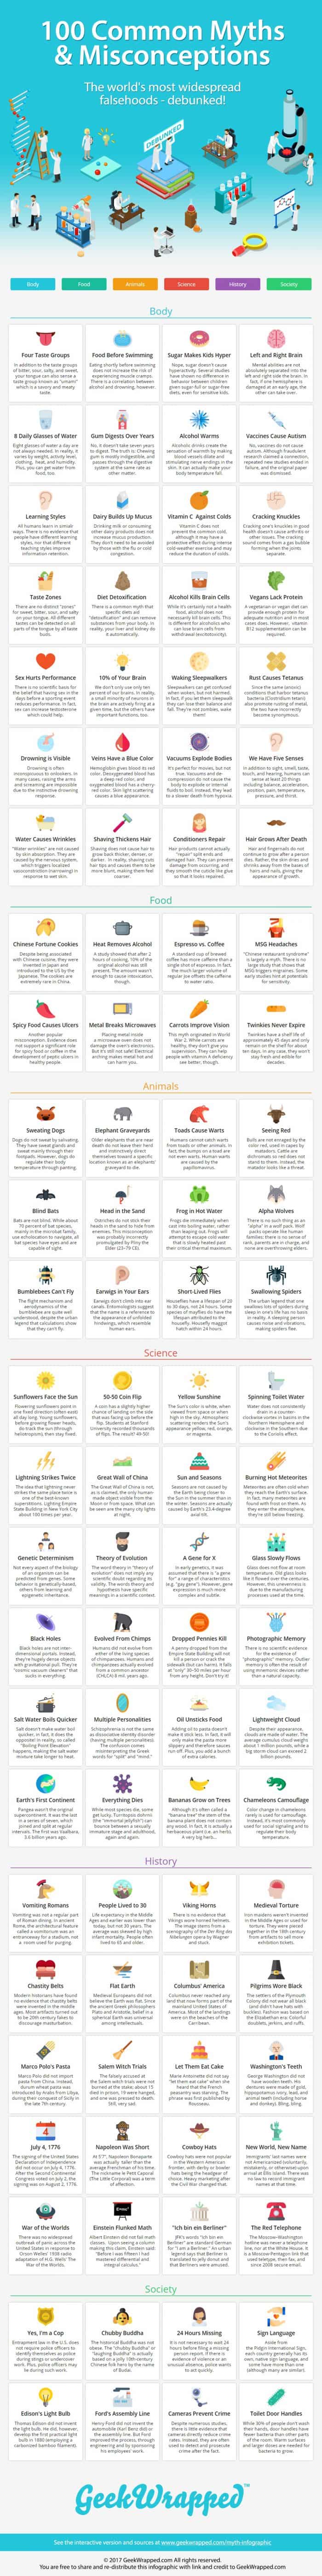 100 common myths and misconceptions infographic.